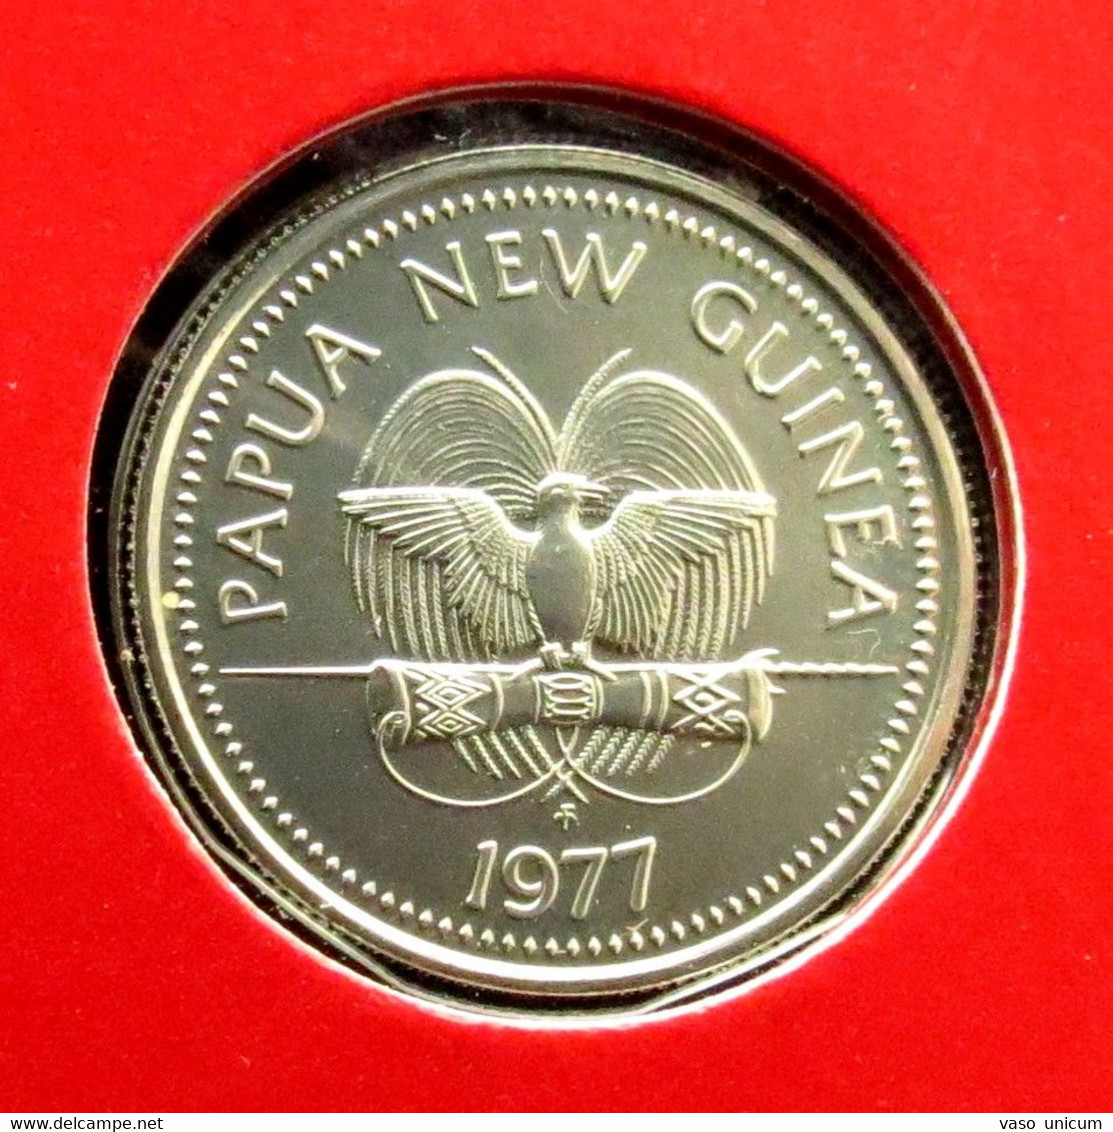 Papua New Guinea 5 Toea 1977 UNC - Minted 603 Coins Only - Papua New Guinea